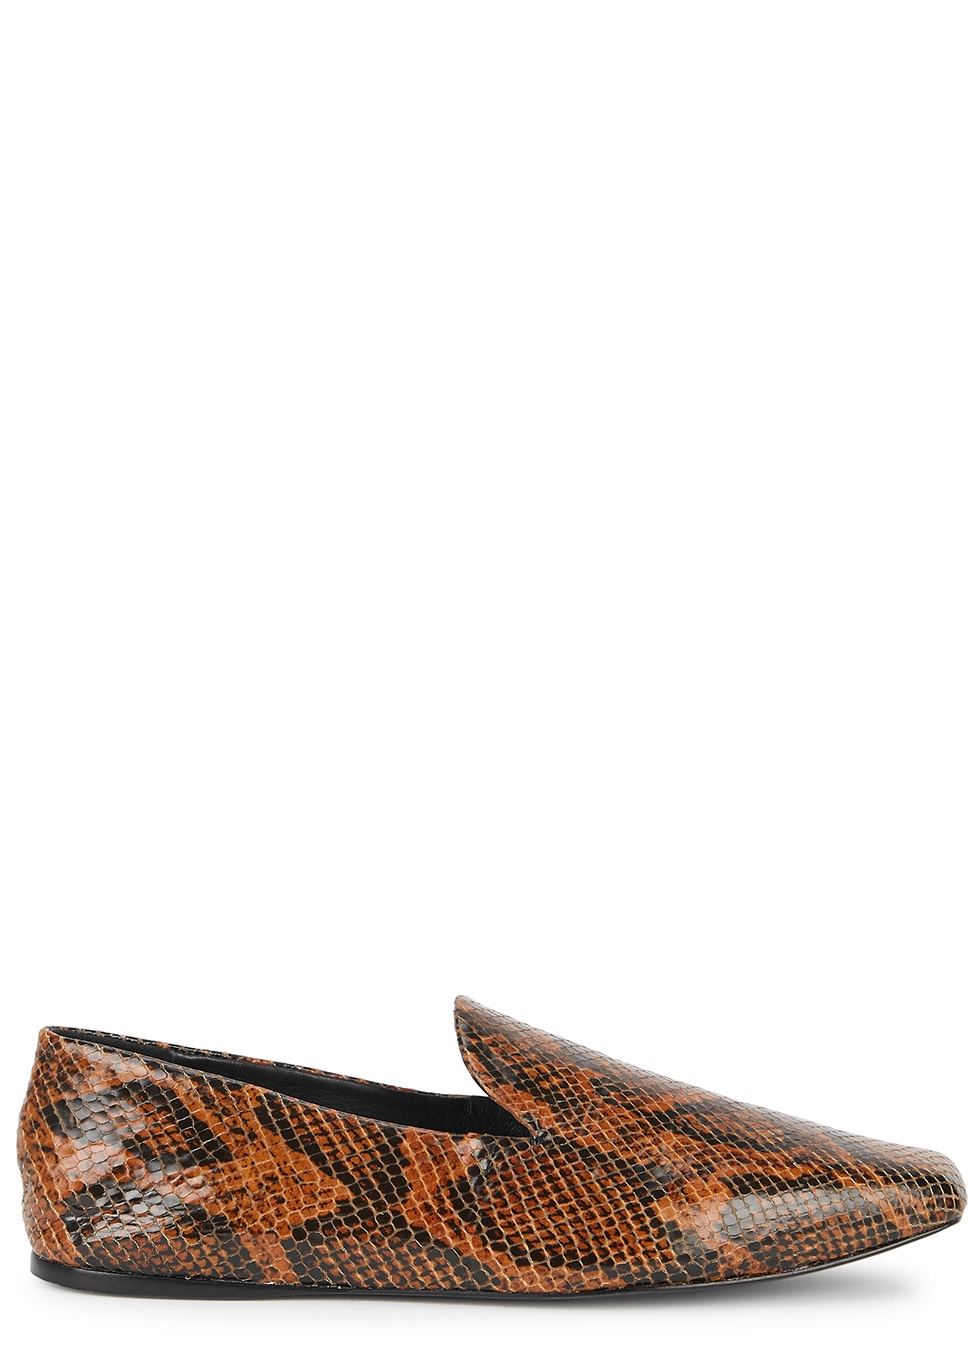 snake leather loafers